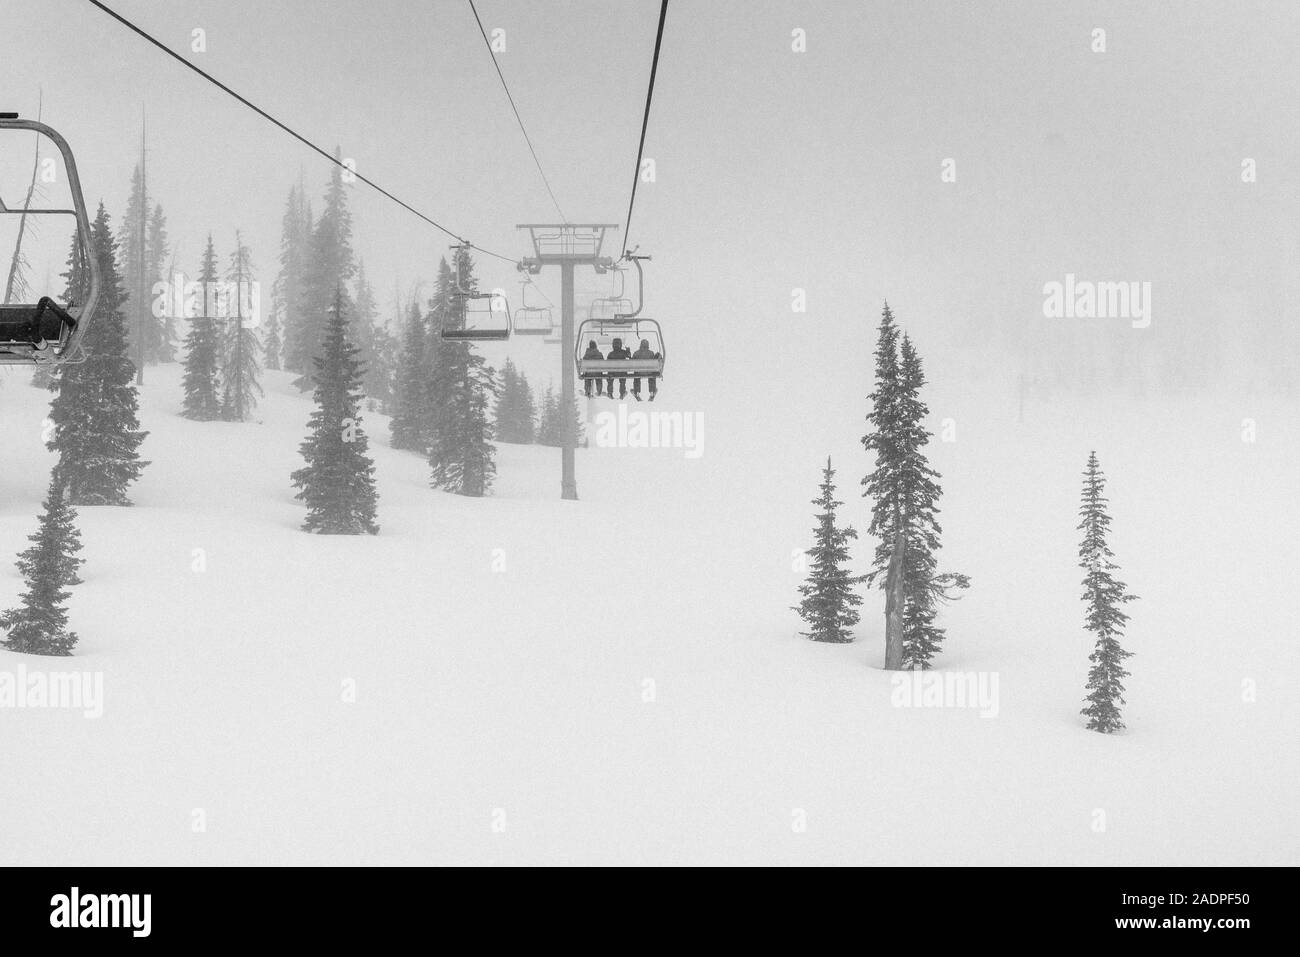 Skiers on chairlift in blizzard Stock Photo